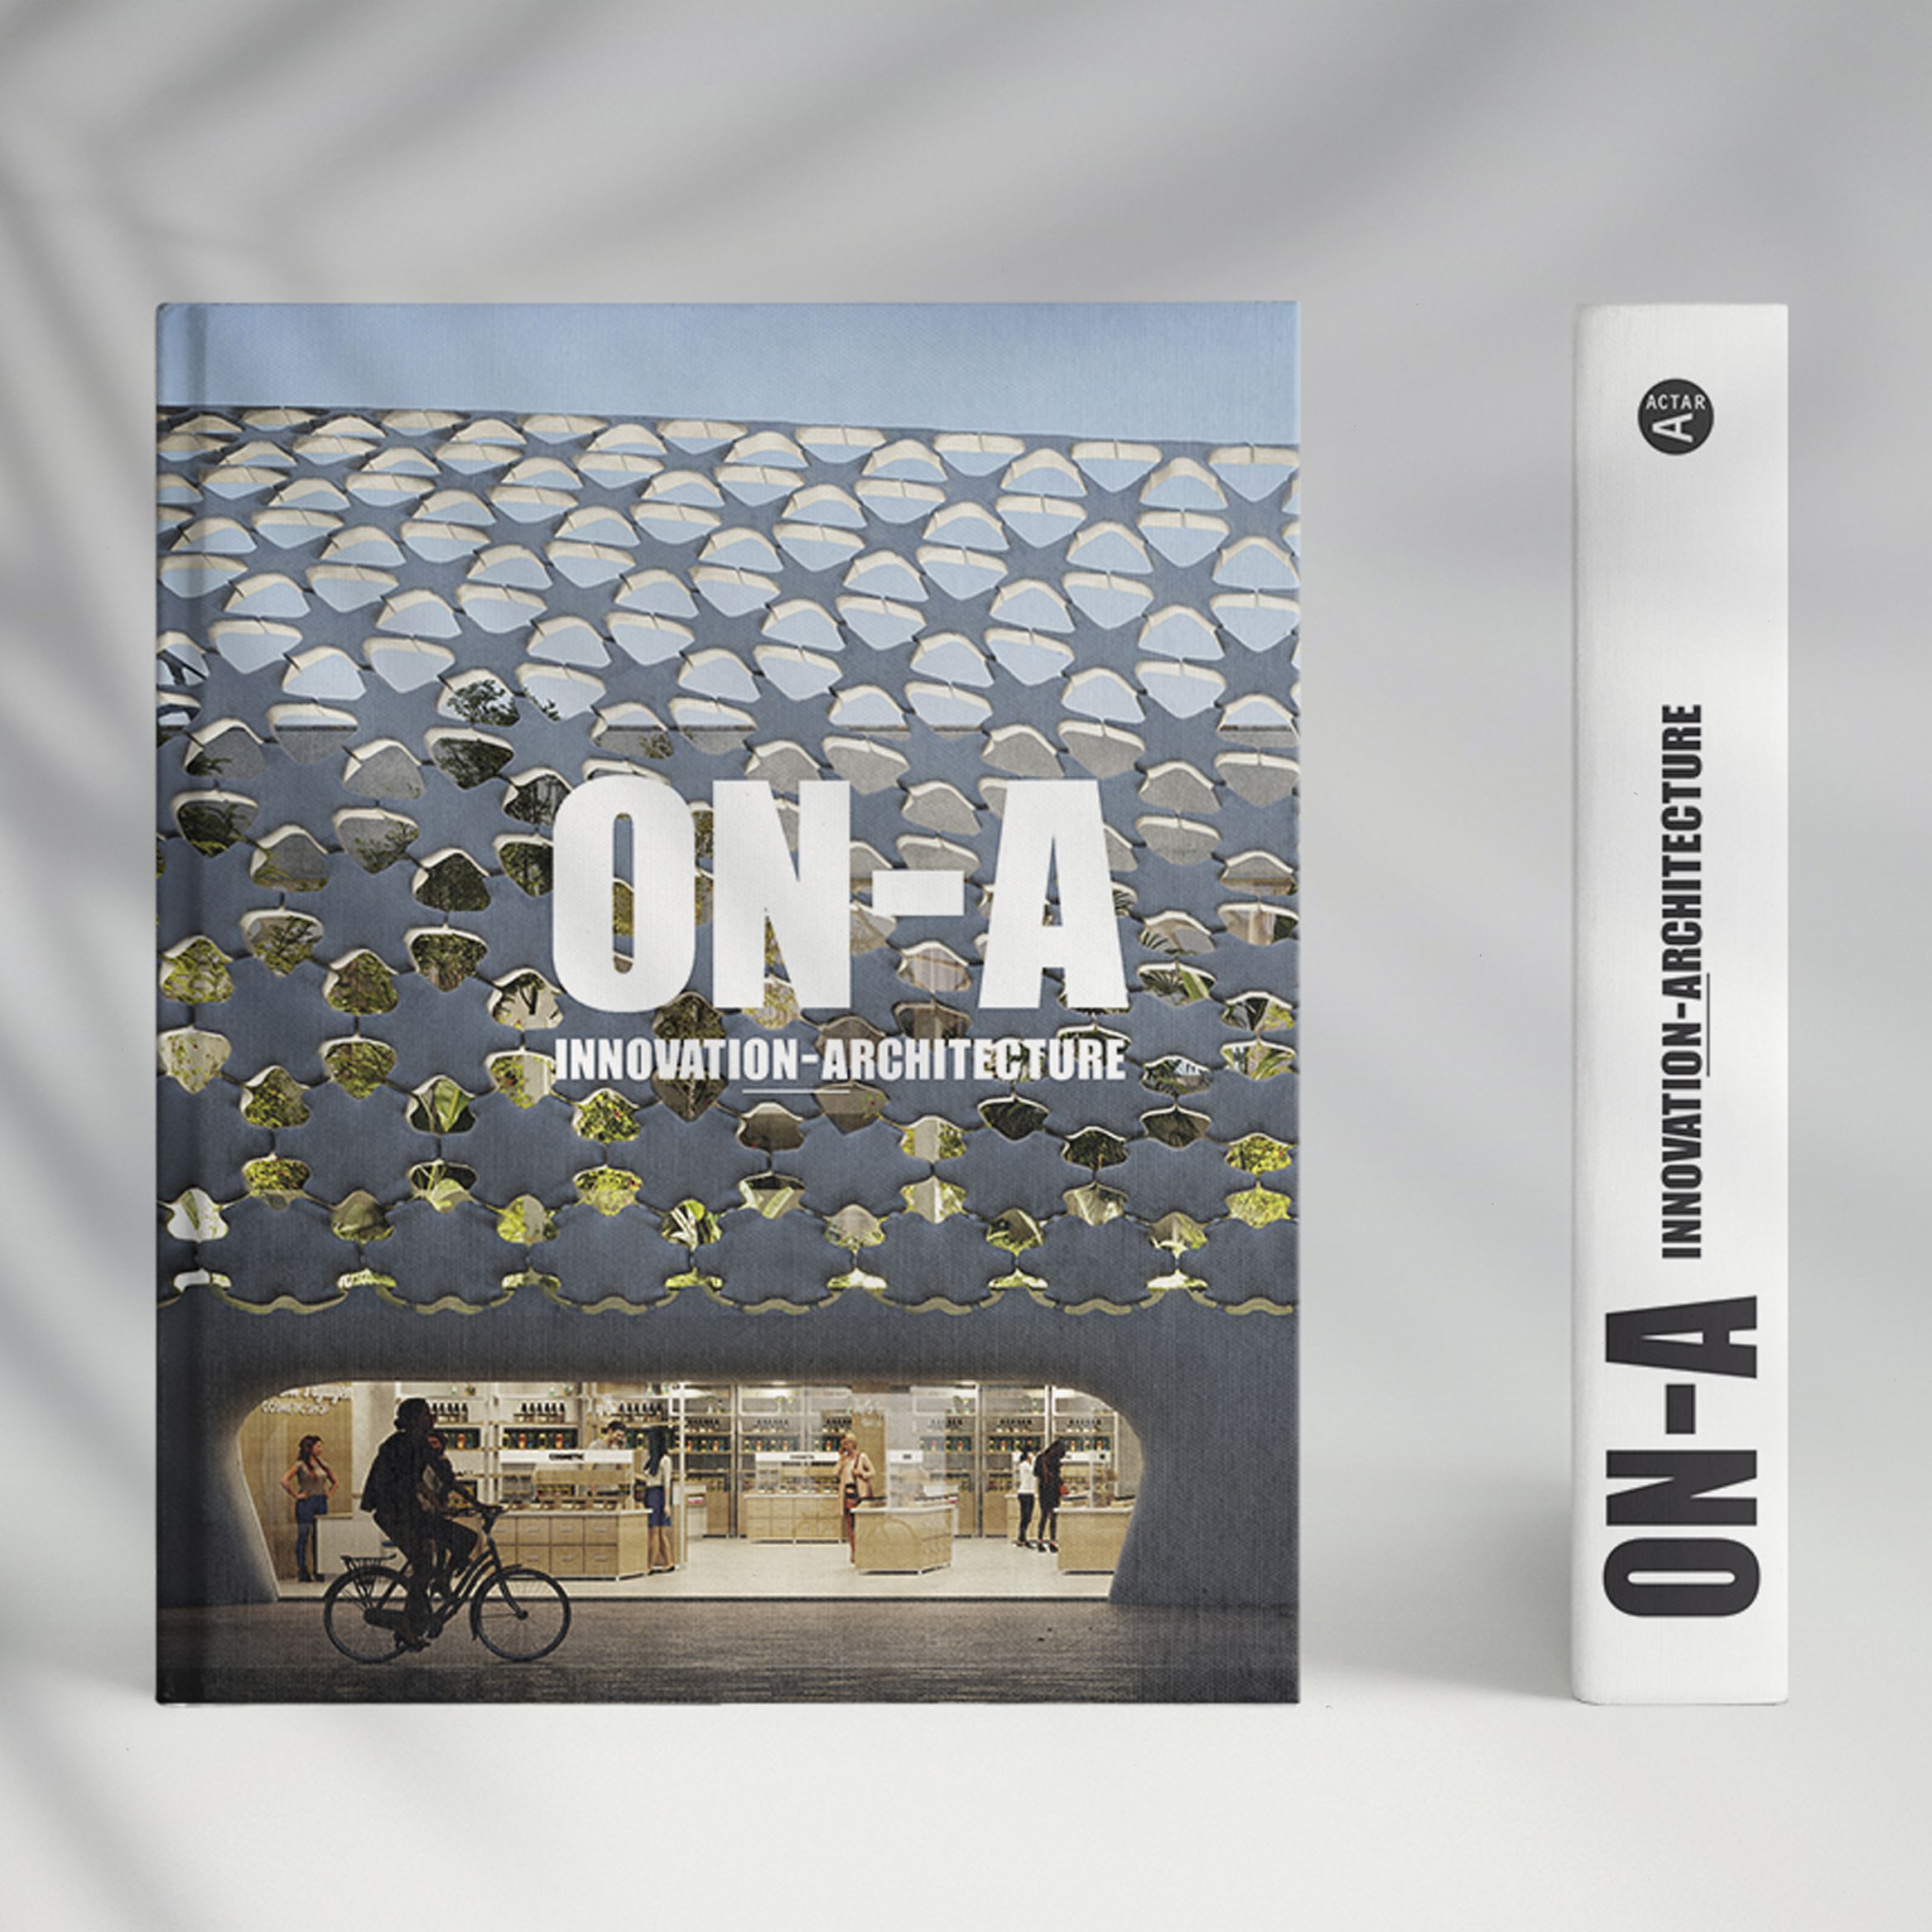 The book reveals the history of ON-A, its philosophy and emotion in architecture, from the beginning of the studio to its global growth, showing its representative projects.